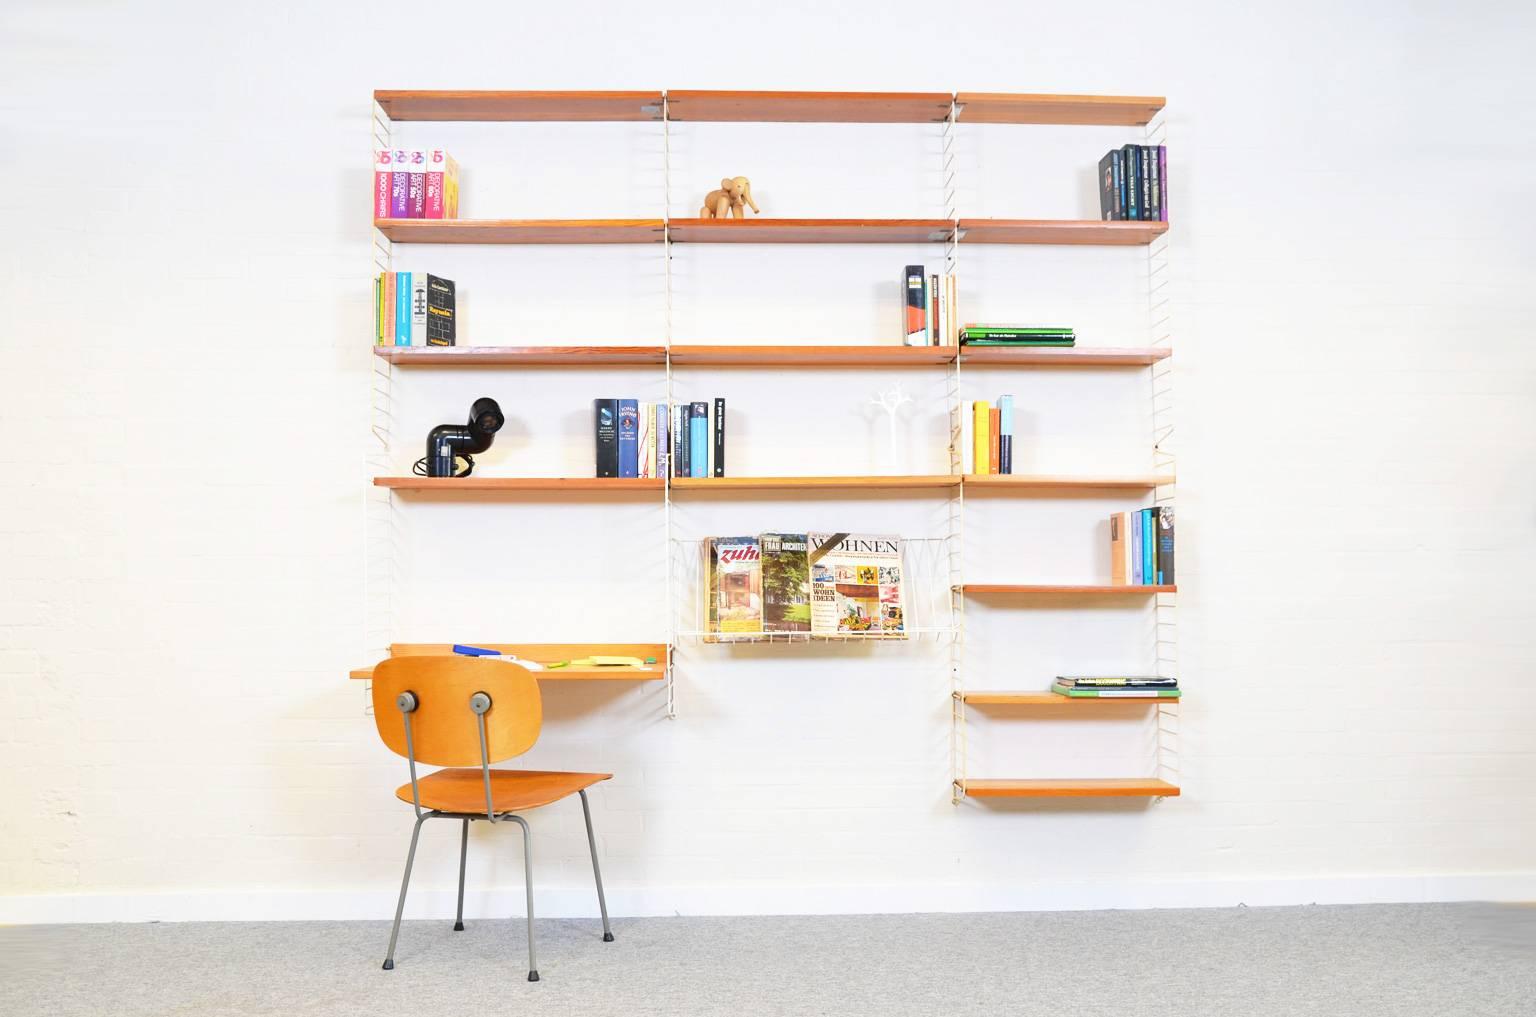 Iconic and transparent shelving system by Nisse Strinning, produced in the 1960s. The system features a small desk, 15 shelves and a wire metal magazine shelf. Manufactured by String design AB, Sweden.